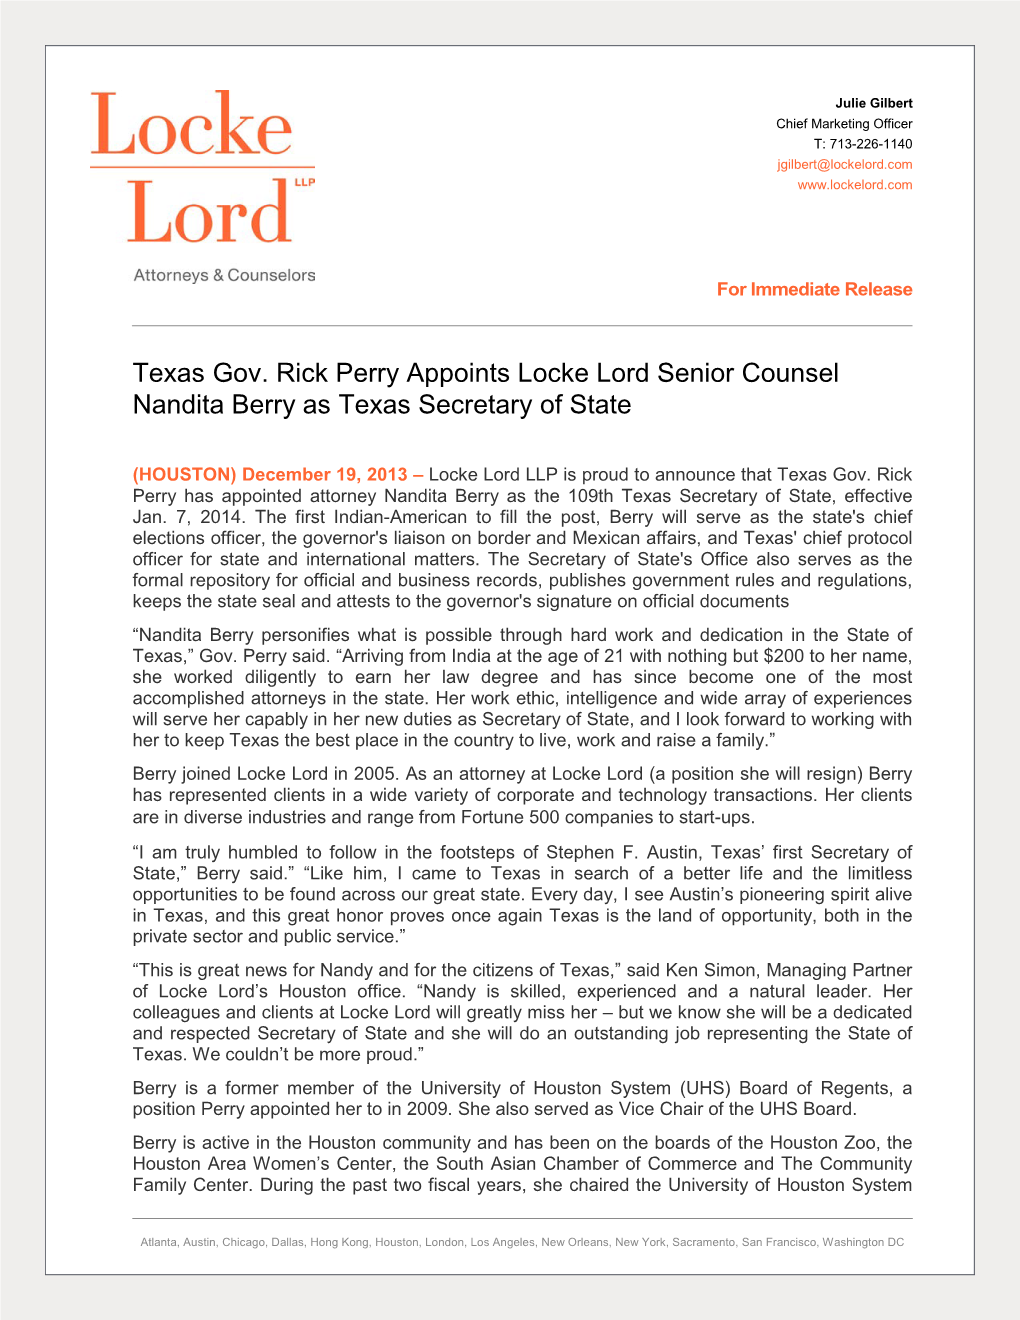 Texas Gov. Rick Perry Appoints Locke Lord Senior Counsel Nandita Berry As Texas Secretary of State